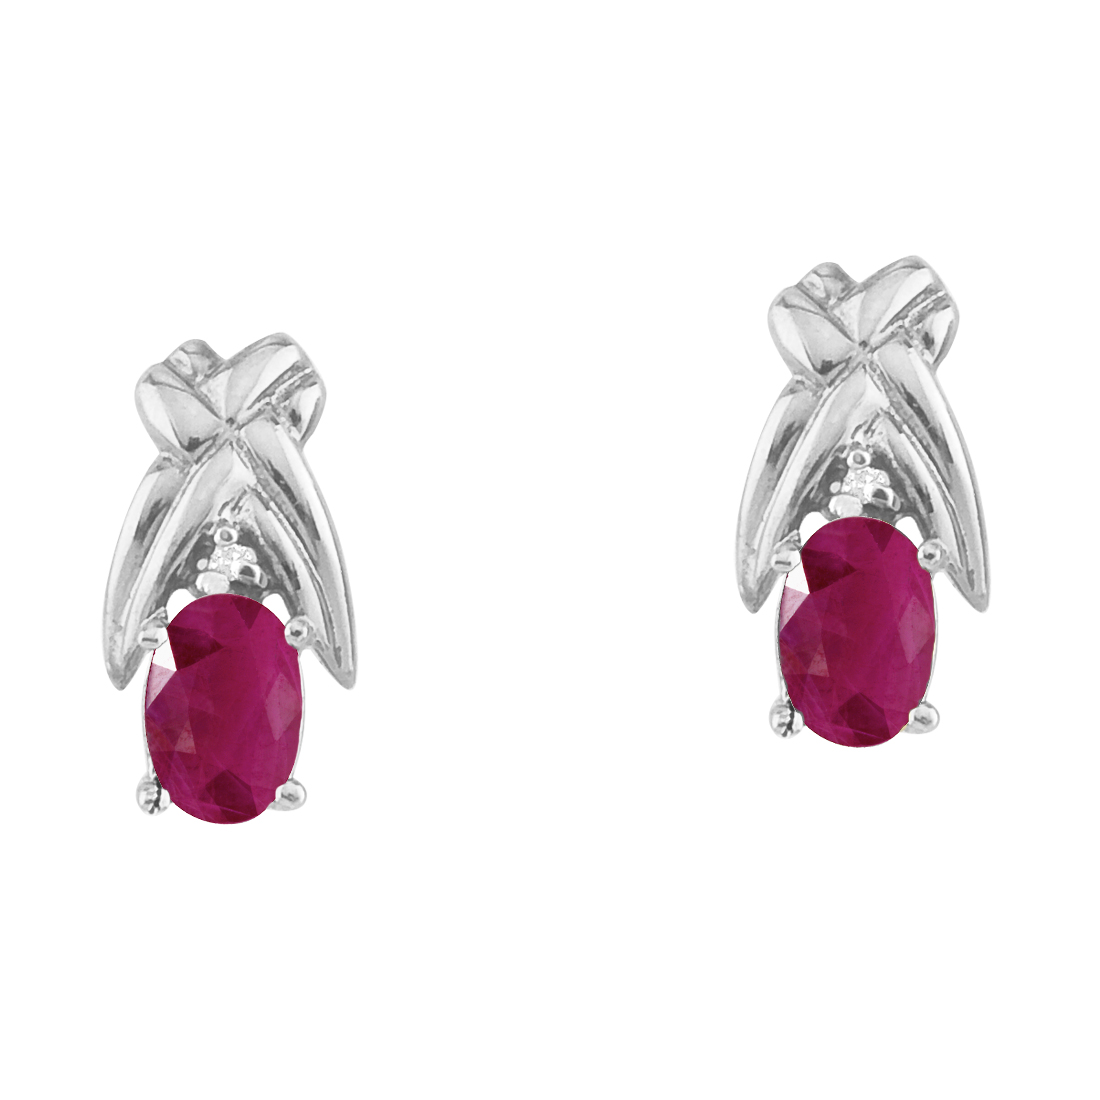 JCX2306: 14k yellow gold stud earrings with 6x4 mm pear rubies and bright diamond accents.